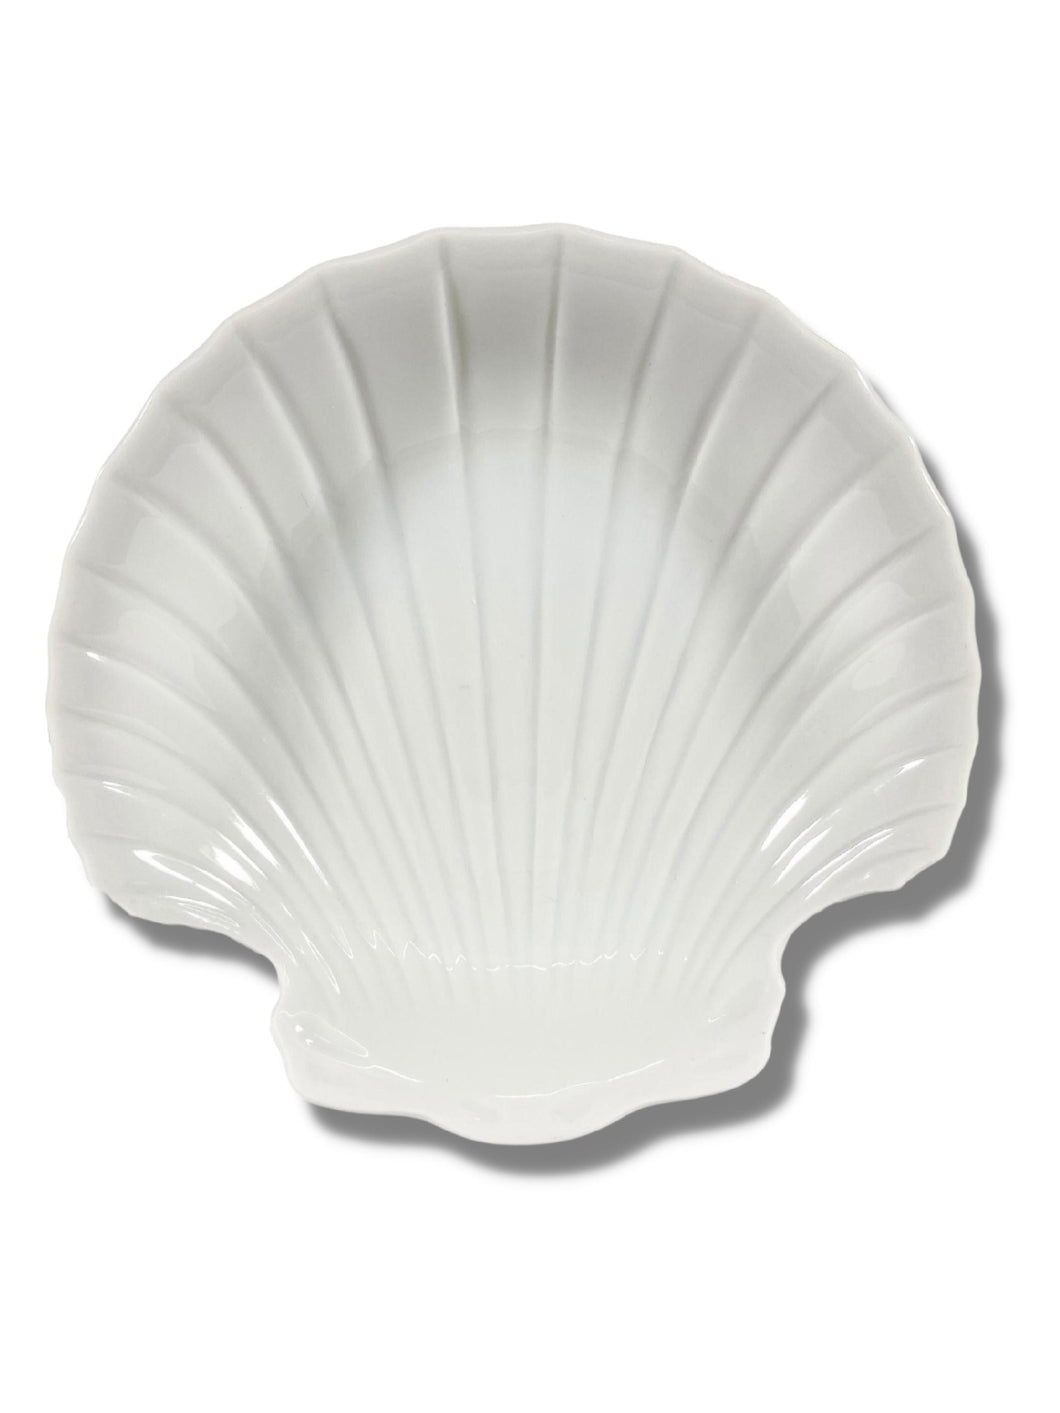 Small Coquille Saint Jacques Dishes (Set)